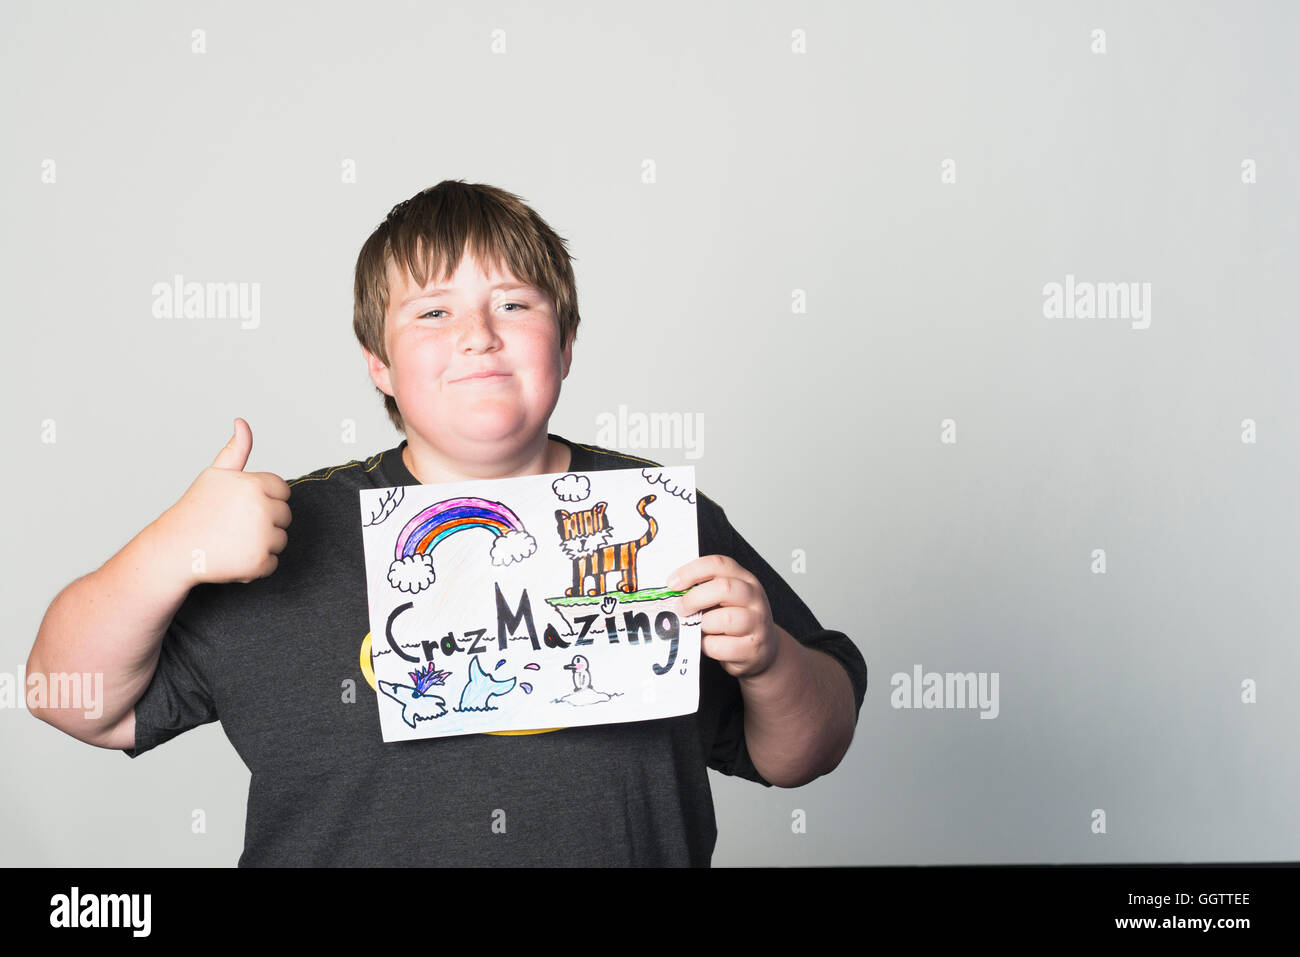 Boy holding sign gesturing thumbs-up Stock Photo